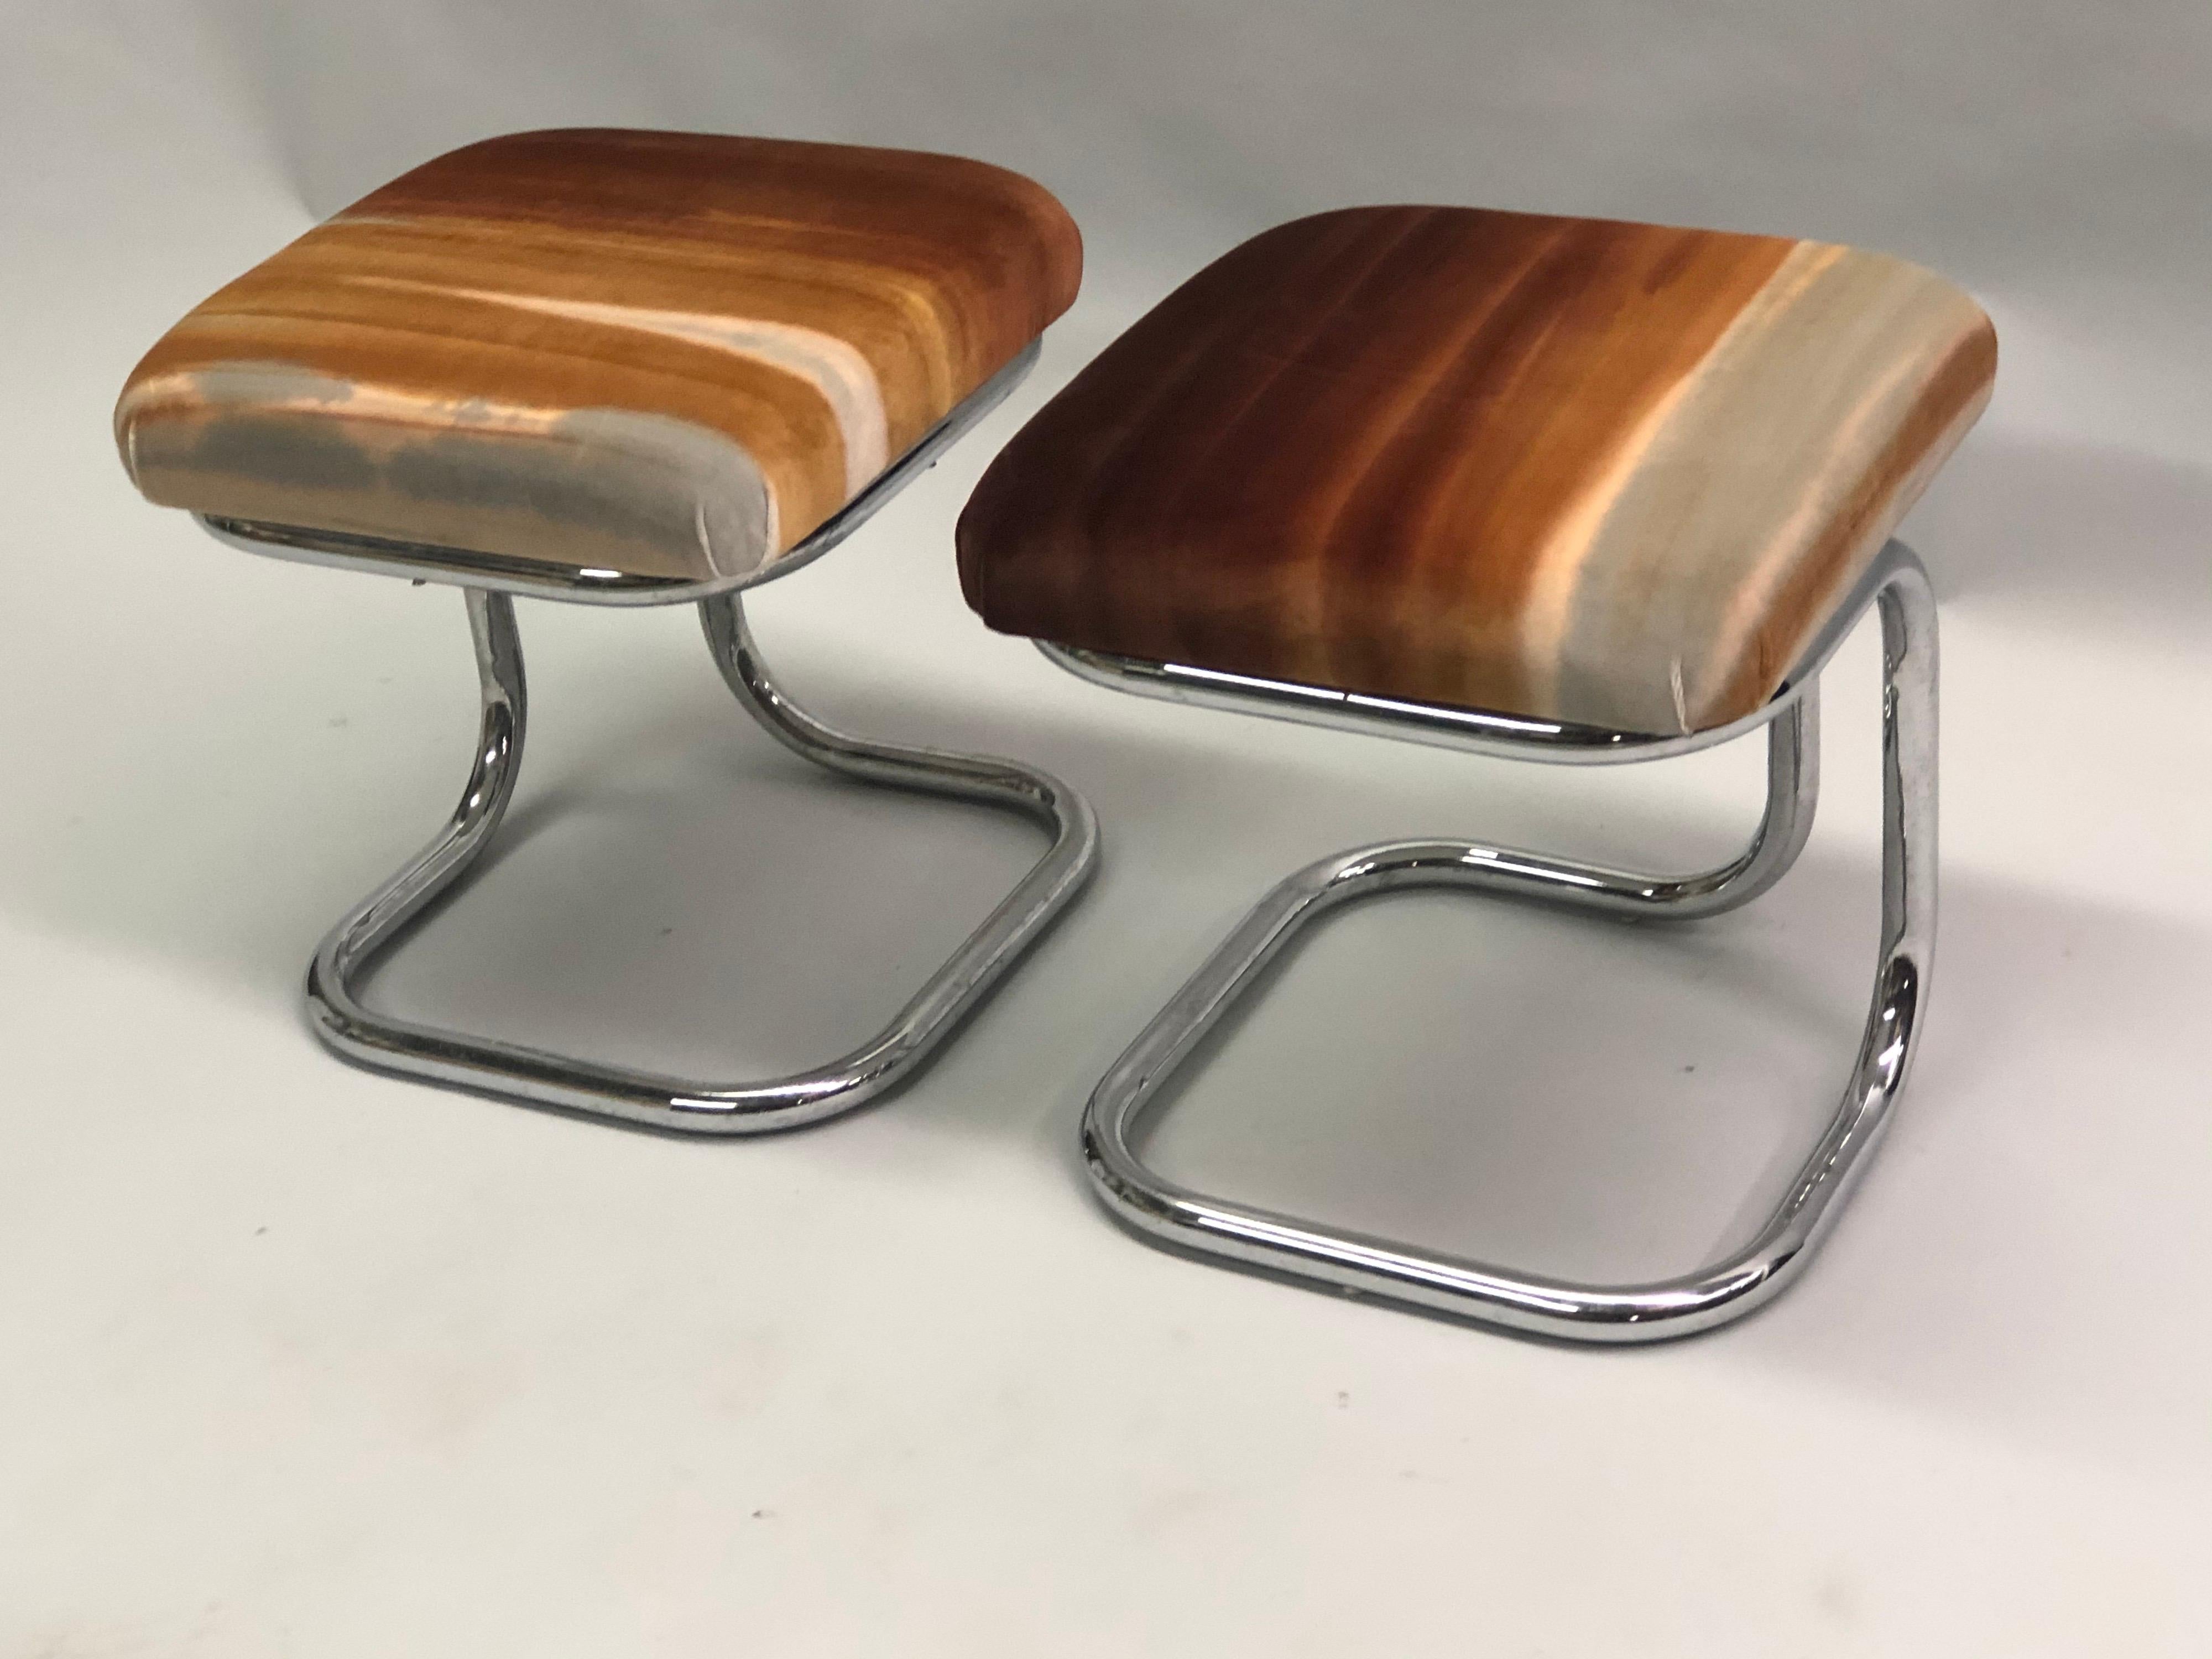 20th Century Pair of French Modernist ‘Bauhaus’ Stools with Upholstered Seats by Hermès For Sale